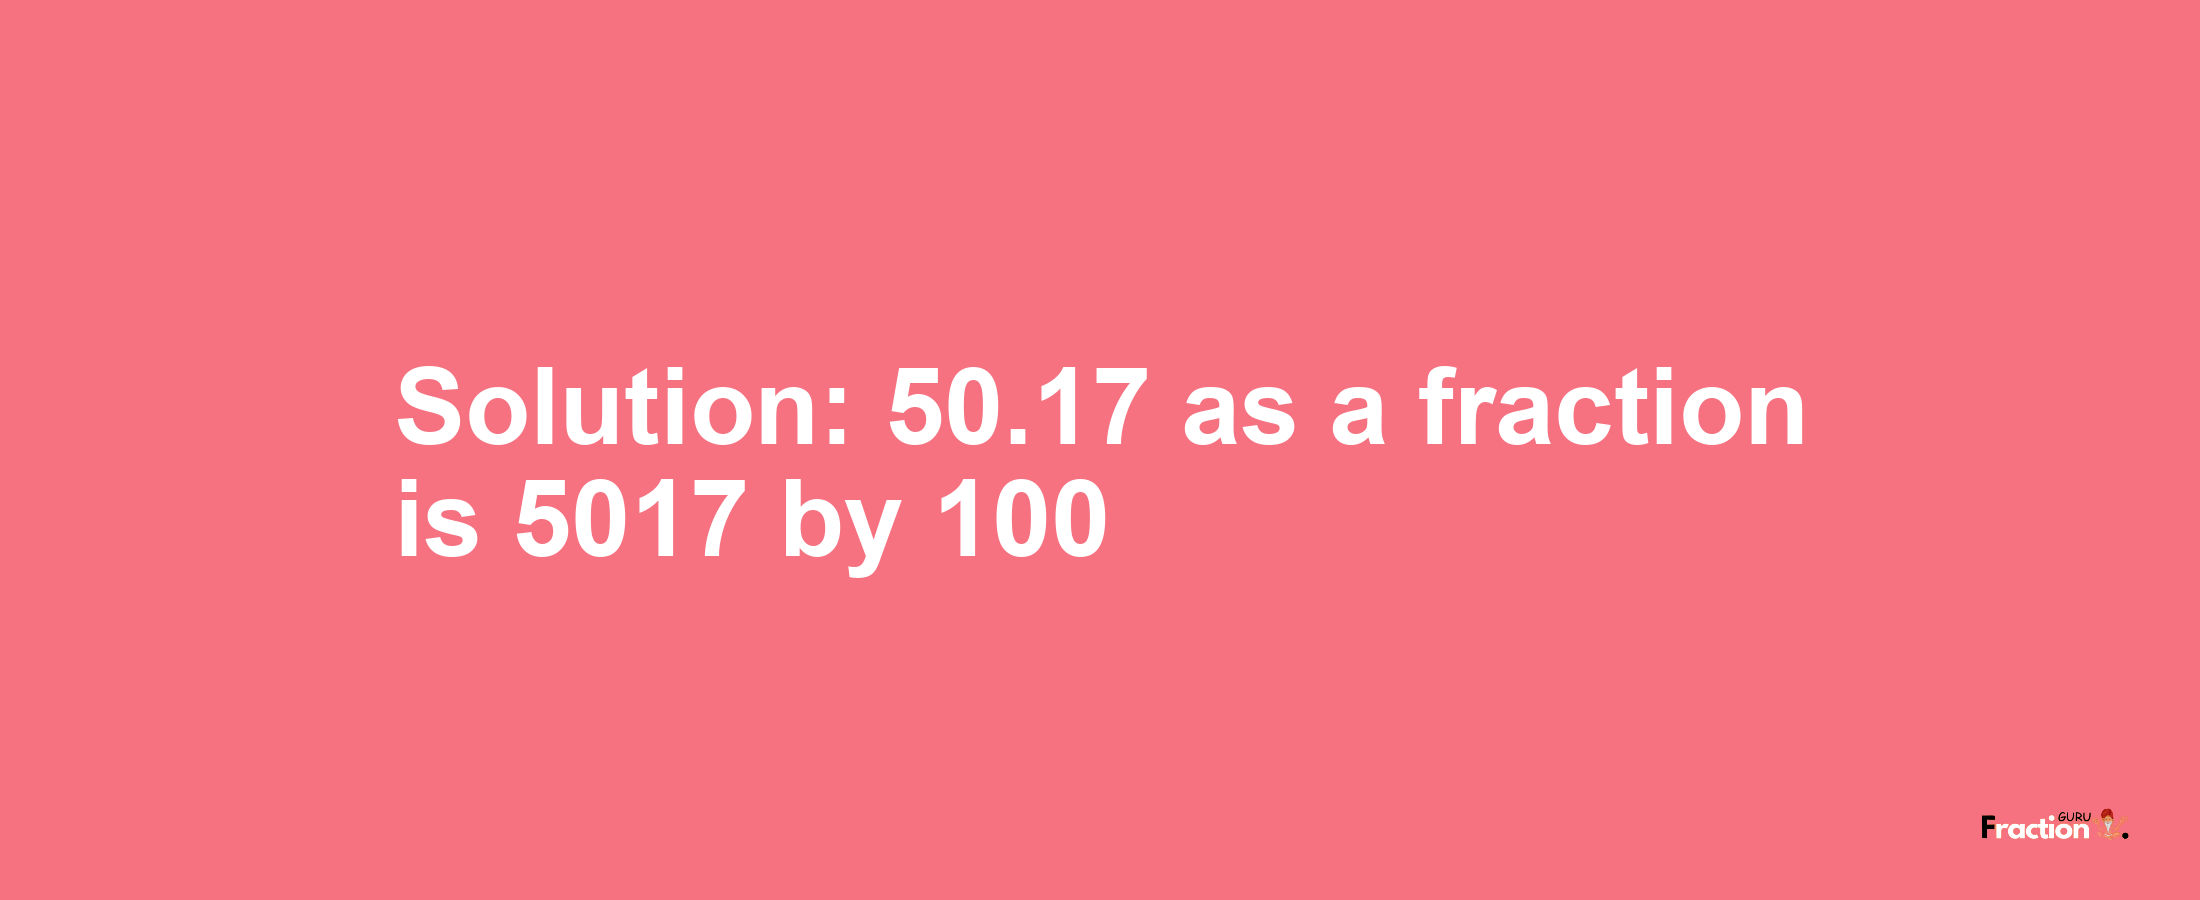 Solution:50.17 as a fraction is 5017/100